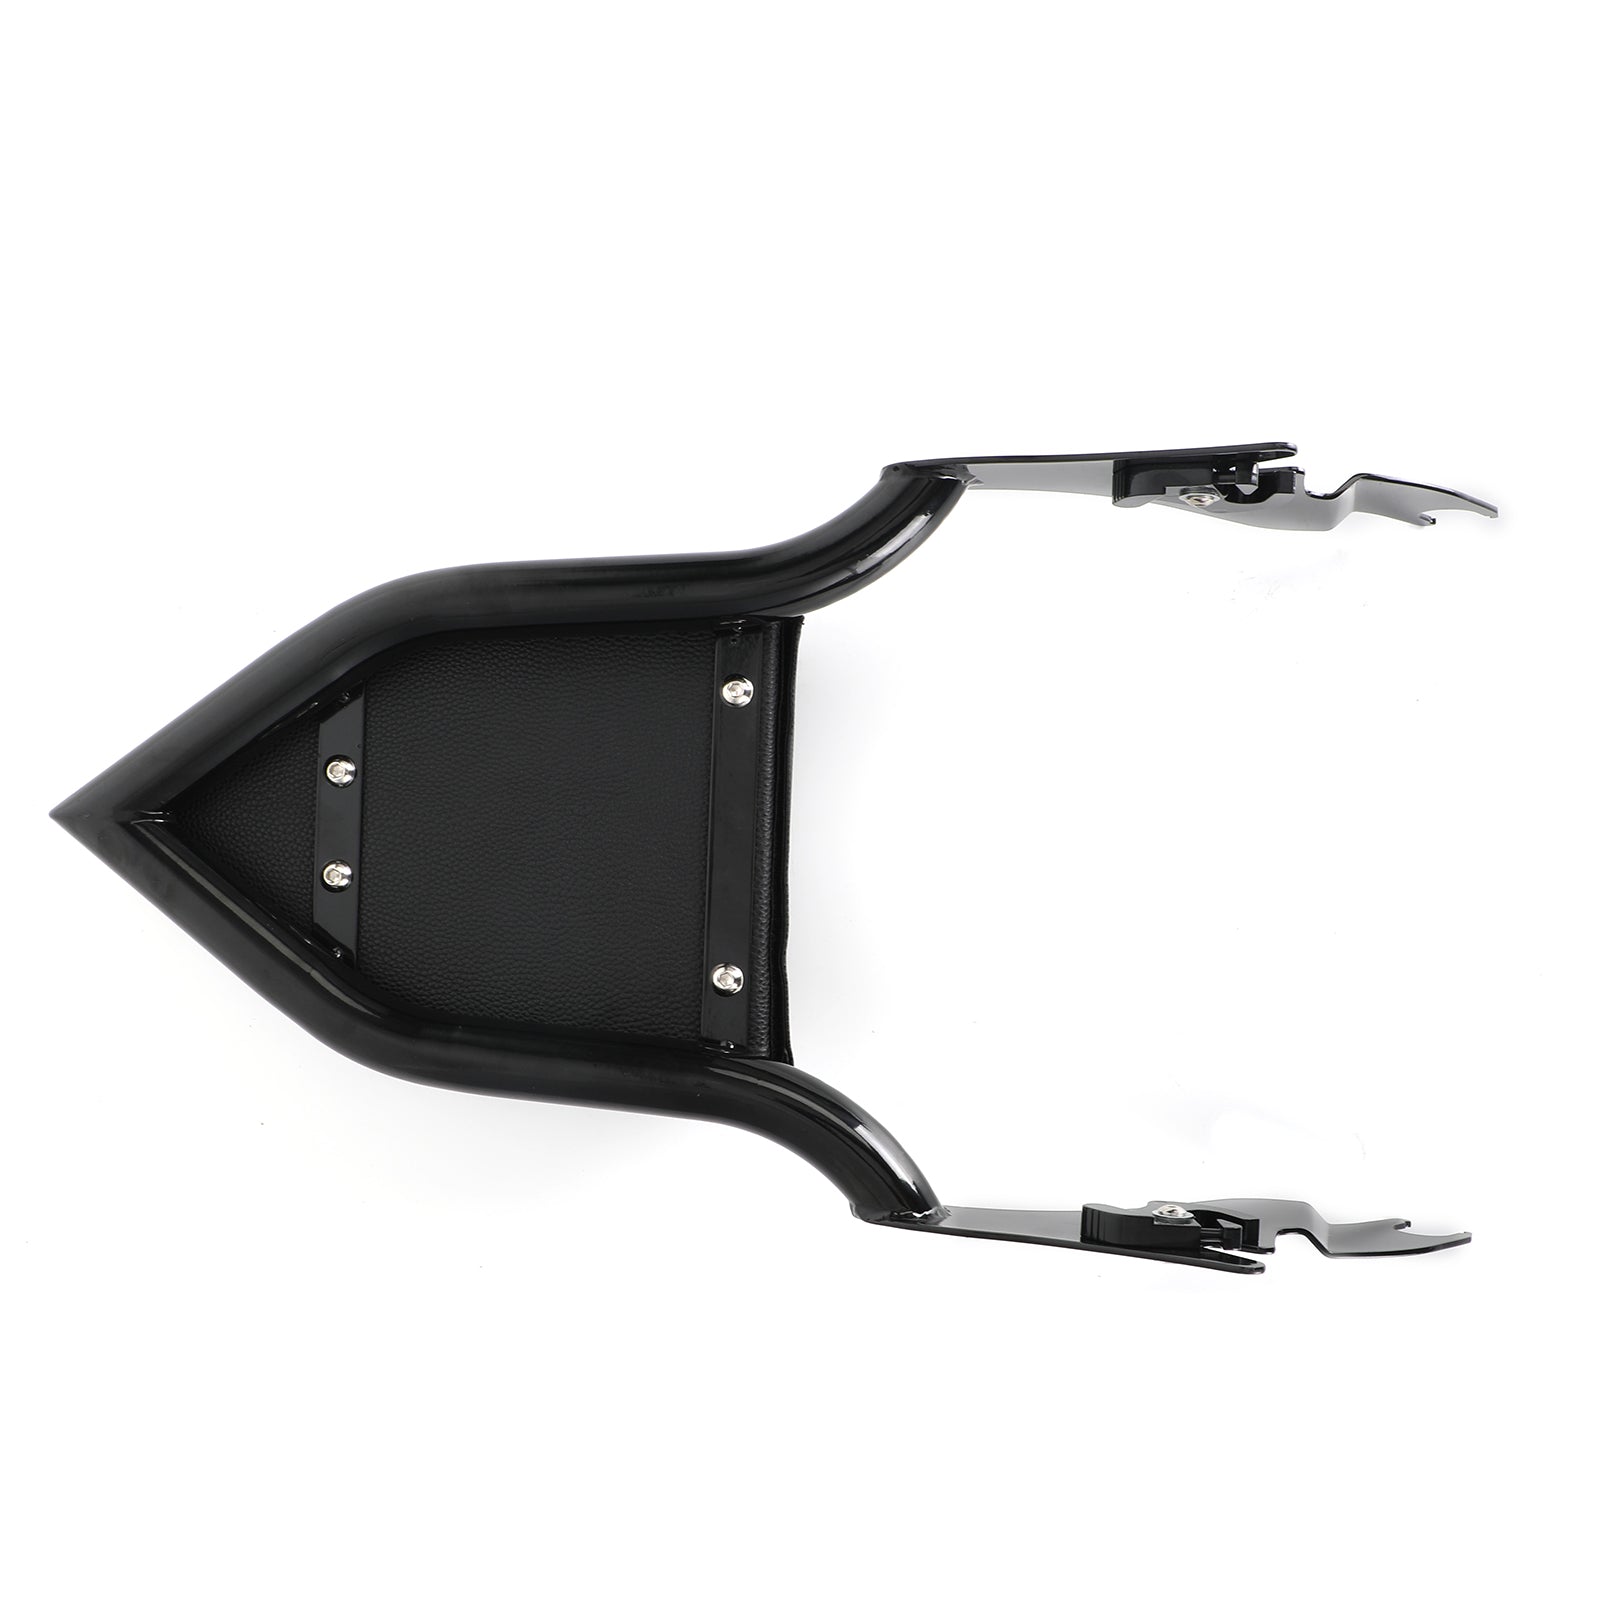 09-21 Harley CVO Road Glide / Touring Road King / Road Glide / Street Glide Abnehmbares Sissy Bar-Rückenpolster